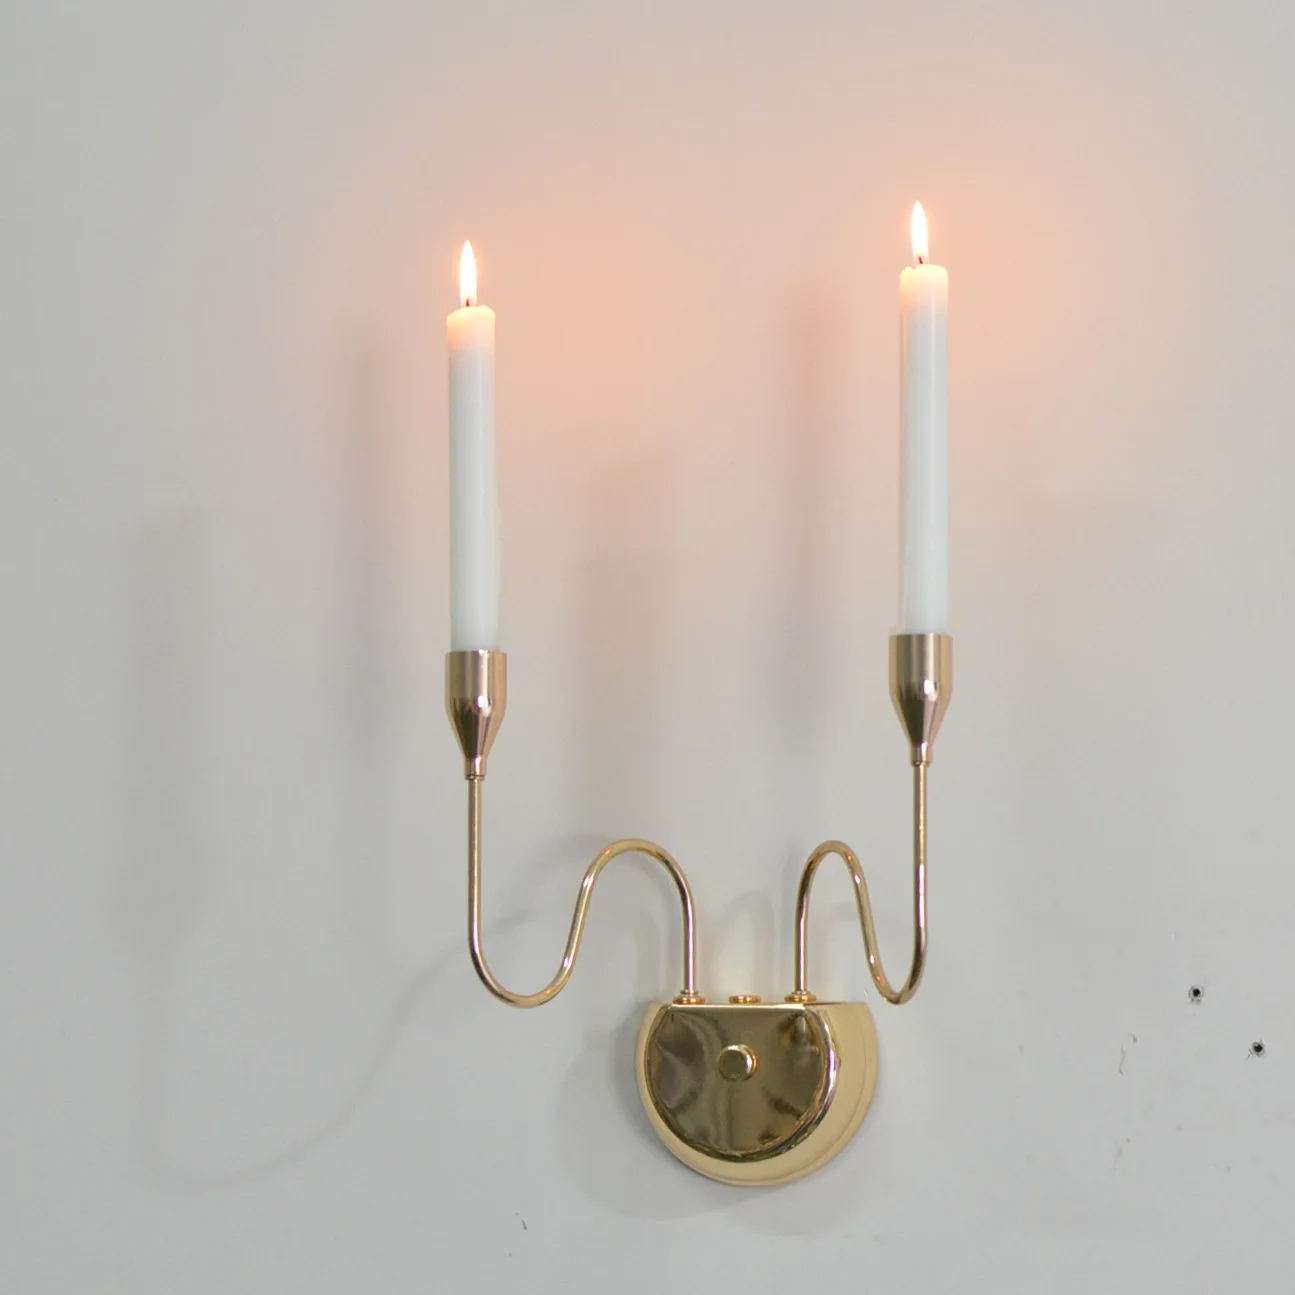 Rustic Gold Wall Sconces for Candles Tealight Hanging Candlestick, Metal Taper Holder for Home Decor